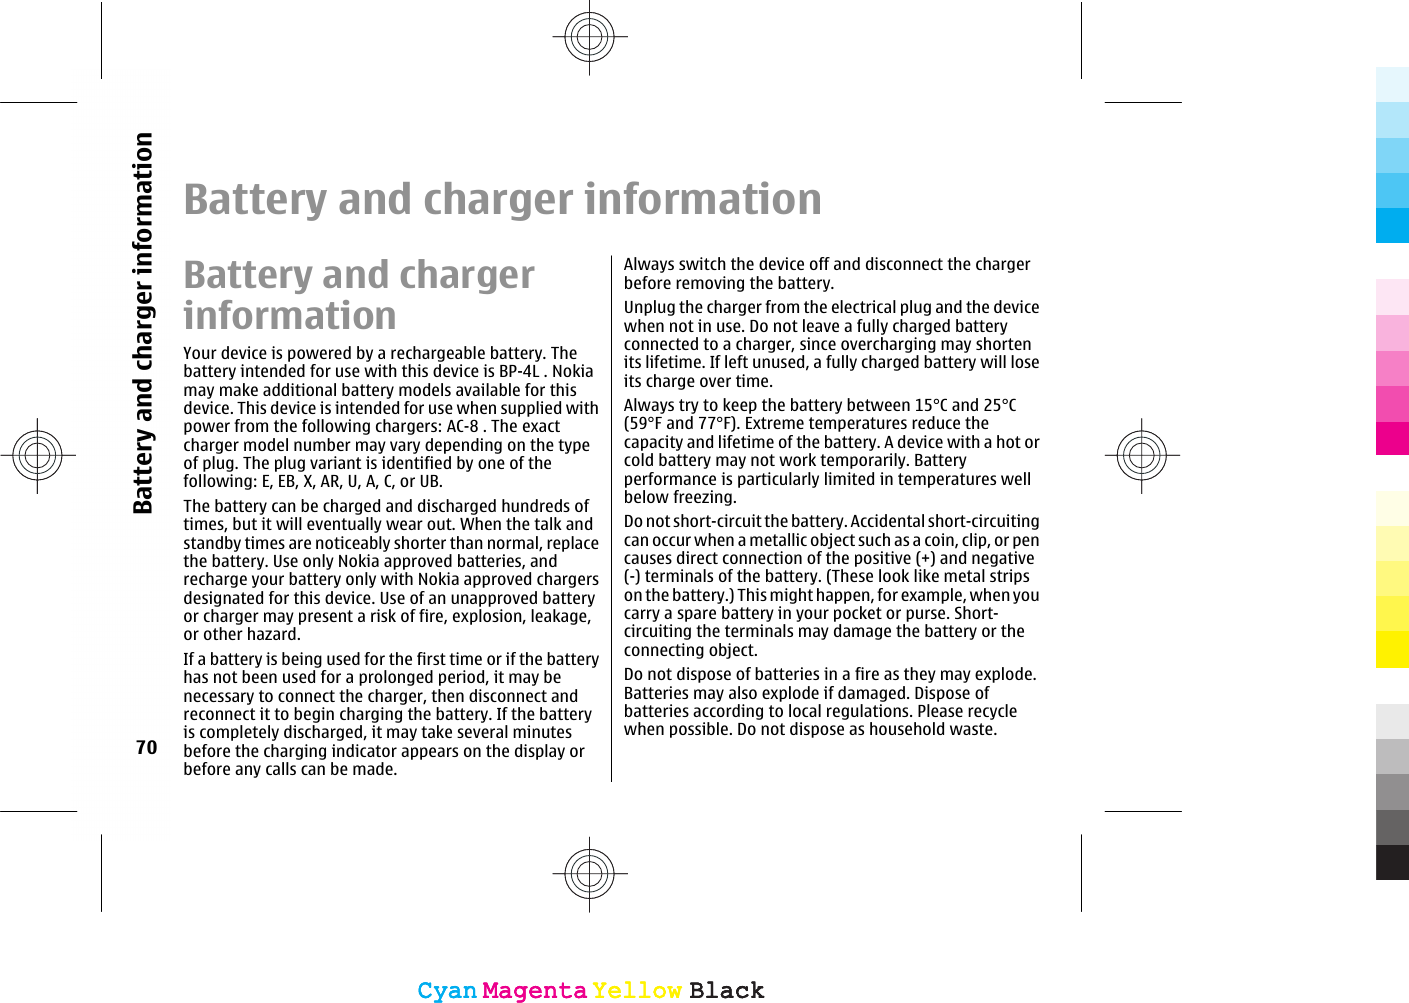 Battery and charger informationBattery and chargerinformationYour device is powered by a rechargeable battery. Thebattery intended for use with this device is BP-4L . Nokiamay make additional battery models available for thisdevice. This device is intended for use when supplied withpower from the following chargers: AC-8 . The exactcharger model number may vary depending on the typeof plug. The plug variant is identified by one of thefollowing: E, EB, X, AR, U, A, C, or UB.The battery can be charged and discharged hundreds oftimes, but it will eventually wear out. When the talk andstandby times are noticeably shorter than normal, replacethe battery. Use only Nokia approved batteries, andrecharge your battery only with Nokia approved chargersdesignated for this device. Use of an unapproved batteryor charger may present a risk of fire, explosion, leakage,or other hazard.If a battery is being used for the first time or if the batteryhas not been used for a prolonged period, it may benecessary to connect the charger, then disconnect andreconnect it to begin charging the battery. If the batteryis completely discharged, it may take several minutesbefore the charging indicator appears on the display orbefore any calls can be made.Always switch the device off and disconnect the chargerbefore removing the battery.Unplug the charger from the electrical plug and the devicewhen not in use. Do not leave a fully charged batteryconnected to a charger, since overcharging may shortenits lifetime. If left unused, a fully charged battery will loseits charge over time.Always try to keep the battery between 15°C and 25°C(59°F and 77°F). Extreme temperatures reduce thecapacity and lifetime of the battery. A device with a hot orcold battery may not work temporarily. Batteryperformance is particularly limited in temperatures wellbelow freezing.Do not short-circuit the battery. Accidental short-circuitingcan occur when a metallic object such as a coin, clip, or pencauses direct connection of the positive (+) and negative(-) terminals of the battery. (These look like metal stripson the battery.) This might happen, for example, when youcarry a spare battery in your pocket or purse. Short-circuiting the terminals may damage the battery or theconnecting object.Do not dispose of batteries in a fire as they may explode.Batteries may also explode if damaged. Dispose ofbatteries according to local regulations. Please recyclewhen possible. Do not dispose as household waste.70Battery and charger informationCyanCyanMagentaMagentaYellowYellowBlackBlackCyanCyanMagentaMagentaYellowYellowBlackBlack